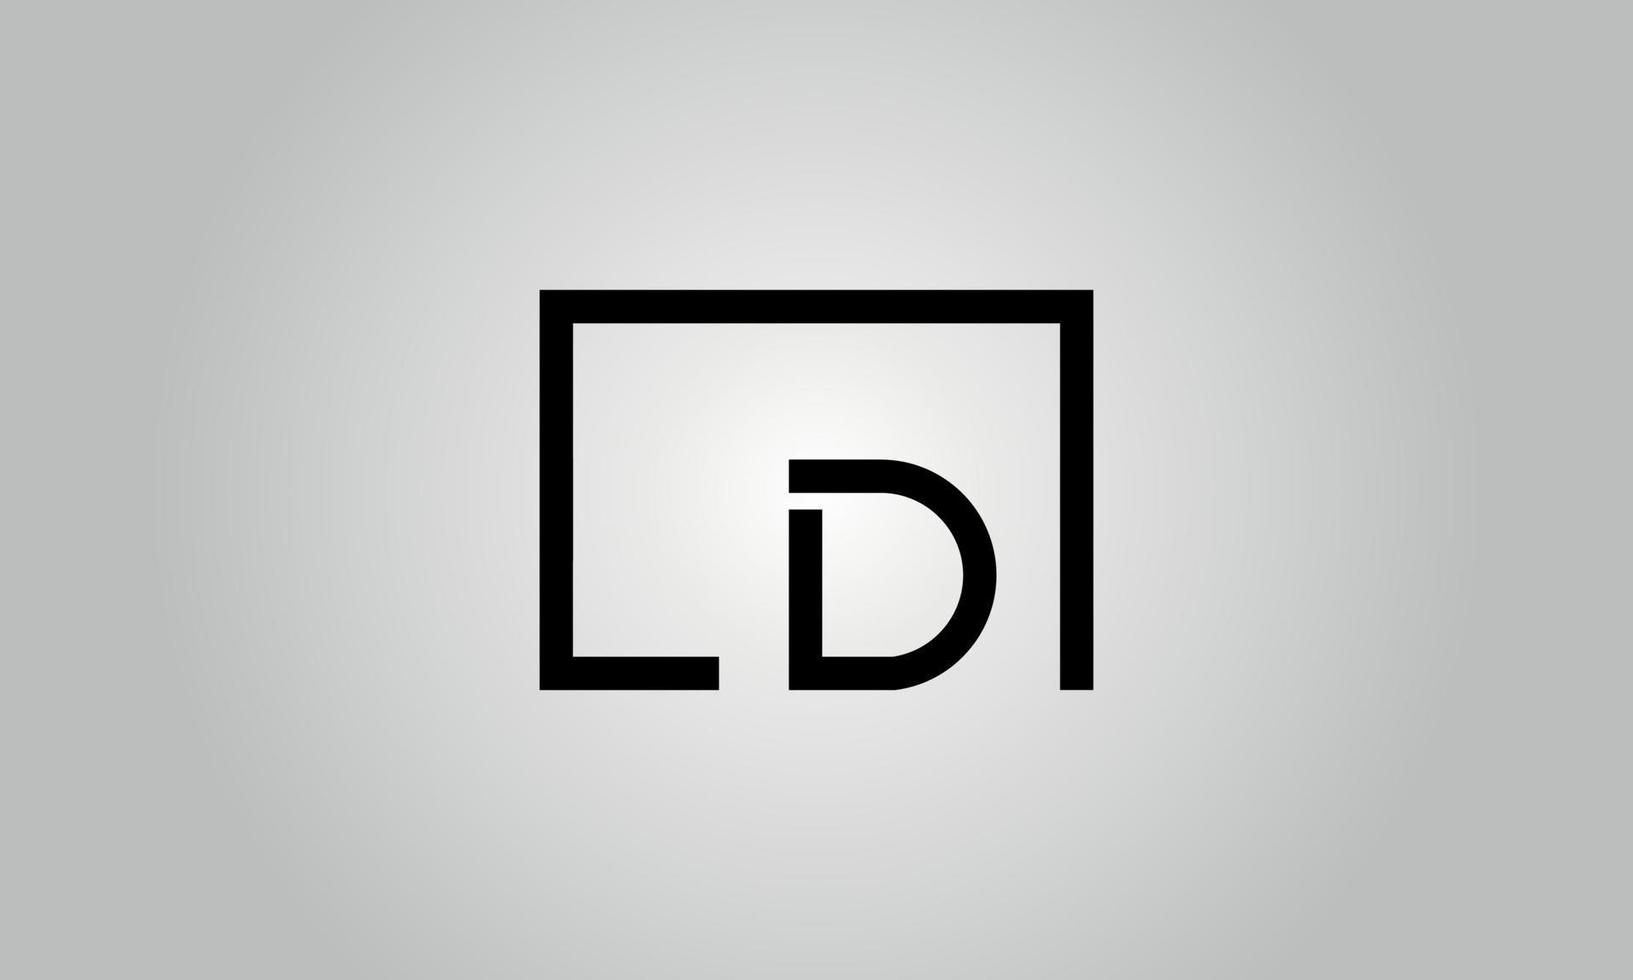 Letter LD logo design. LD logo with square shape in black colors vector free vector template.